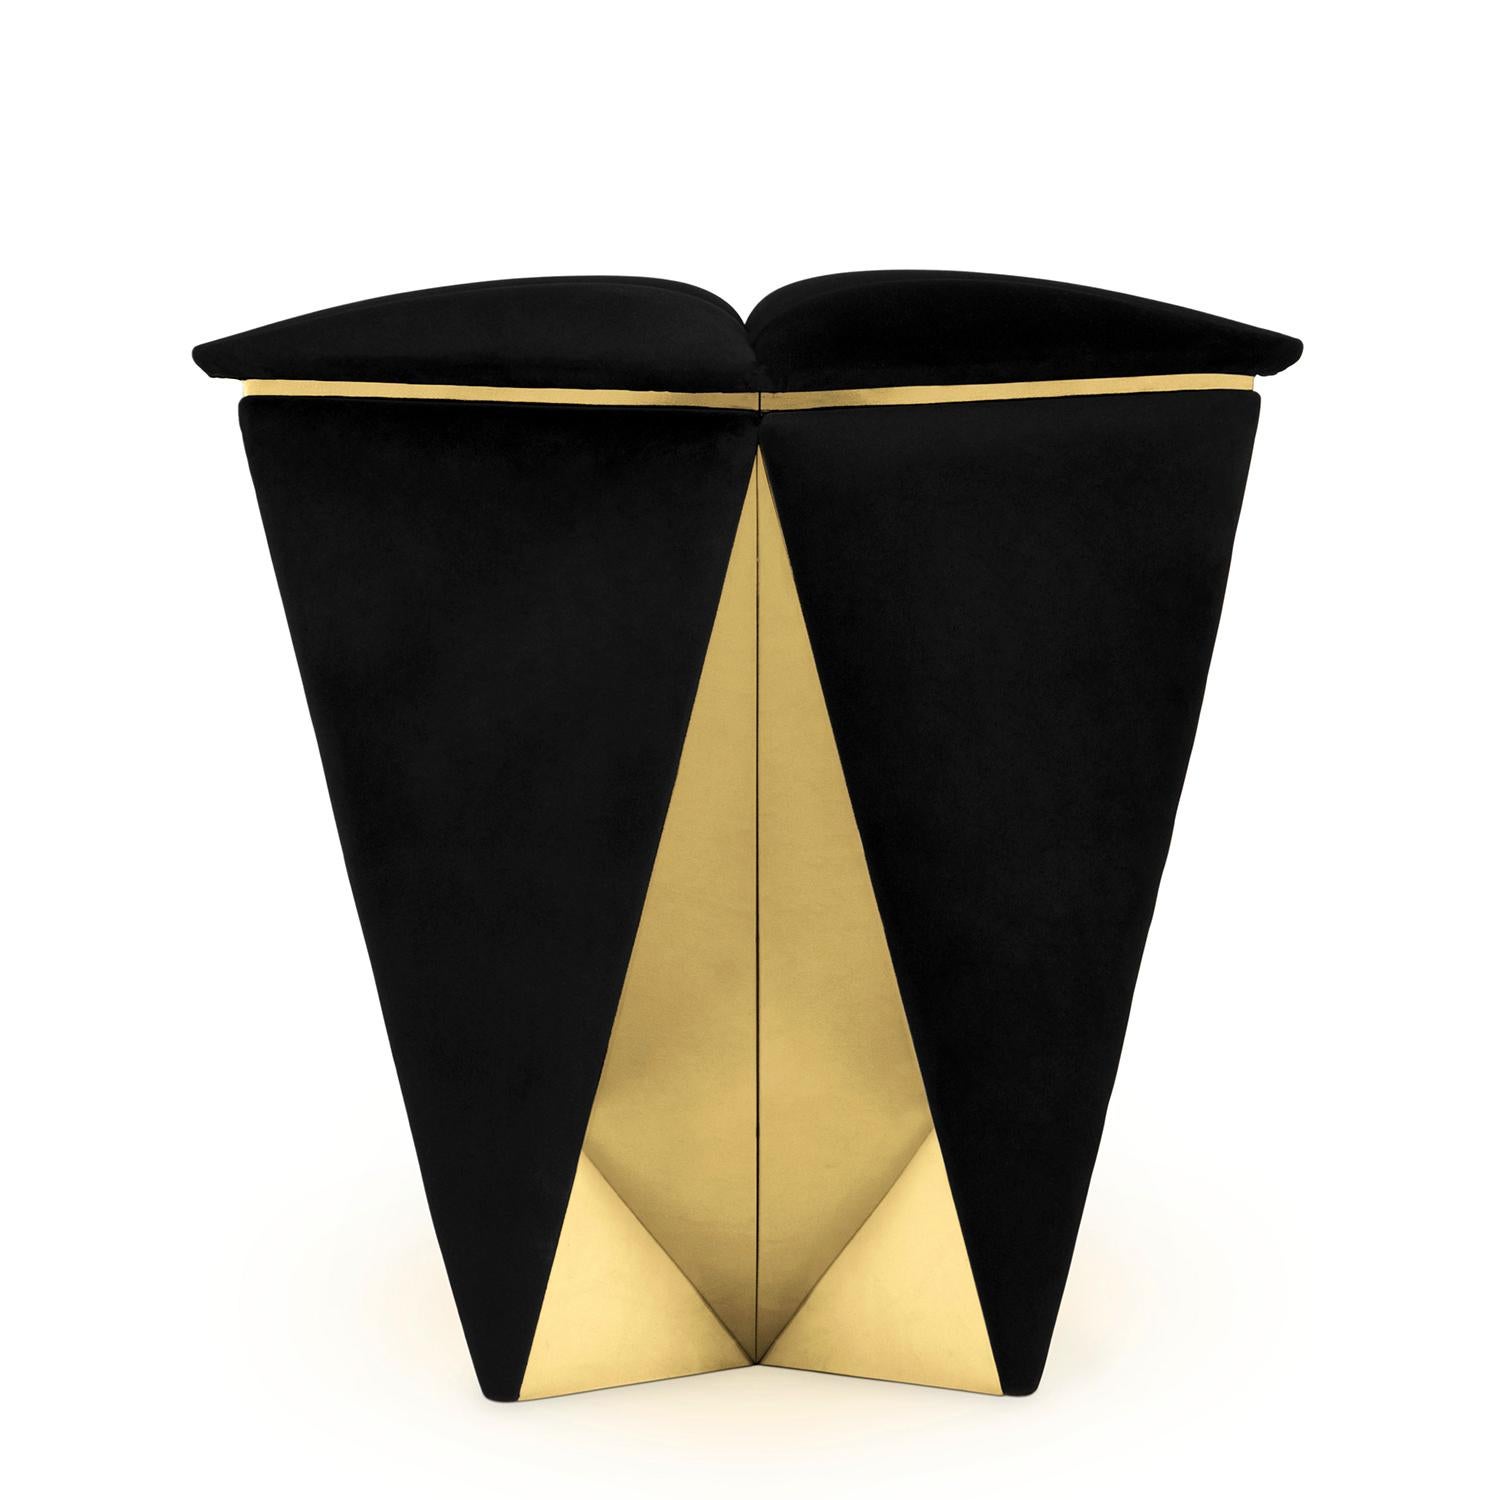 Stool Matris with structure in solid wood,
upholstered and covered with black velvet 
fabric, with polished brass sides from the base.